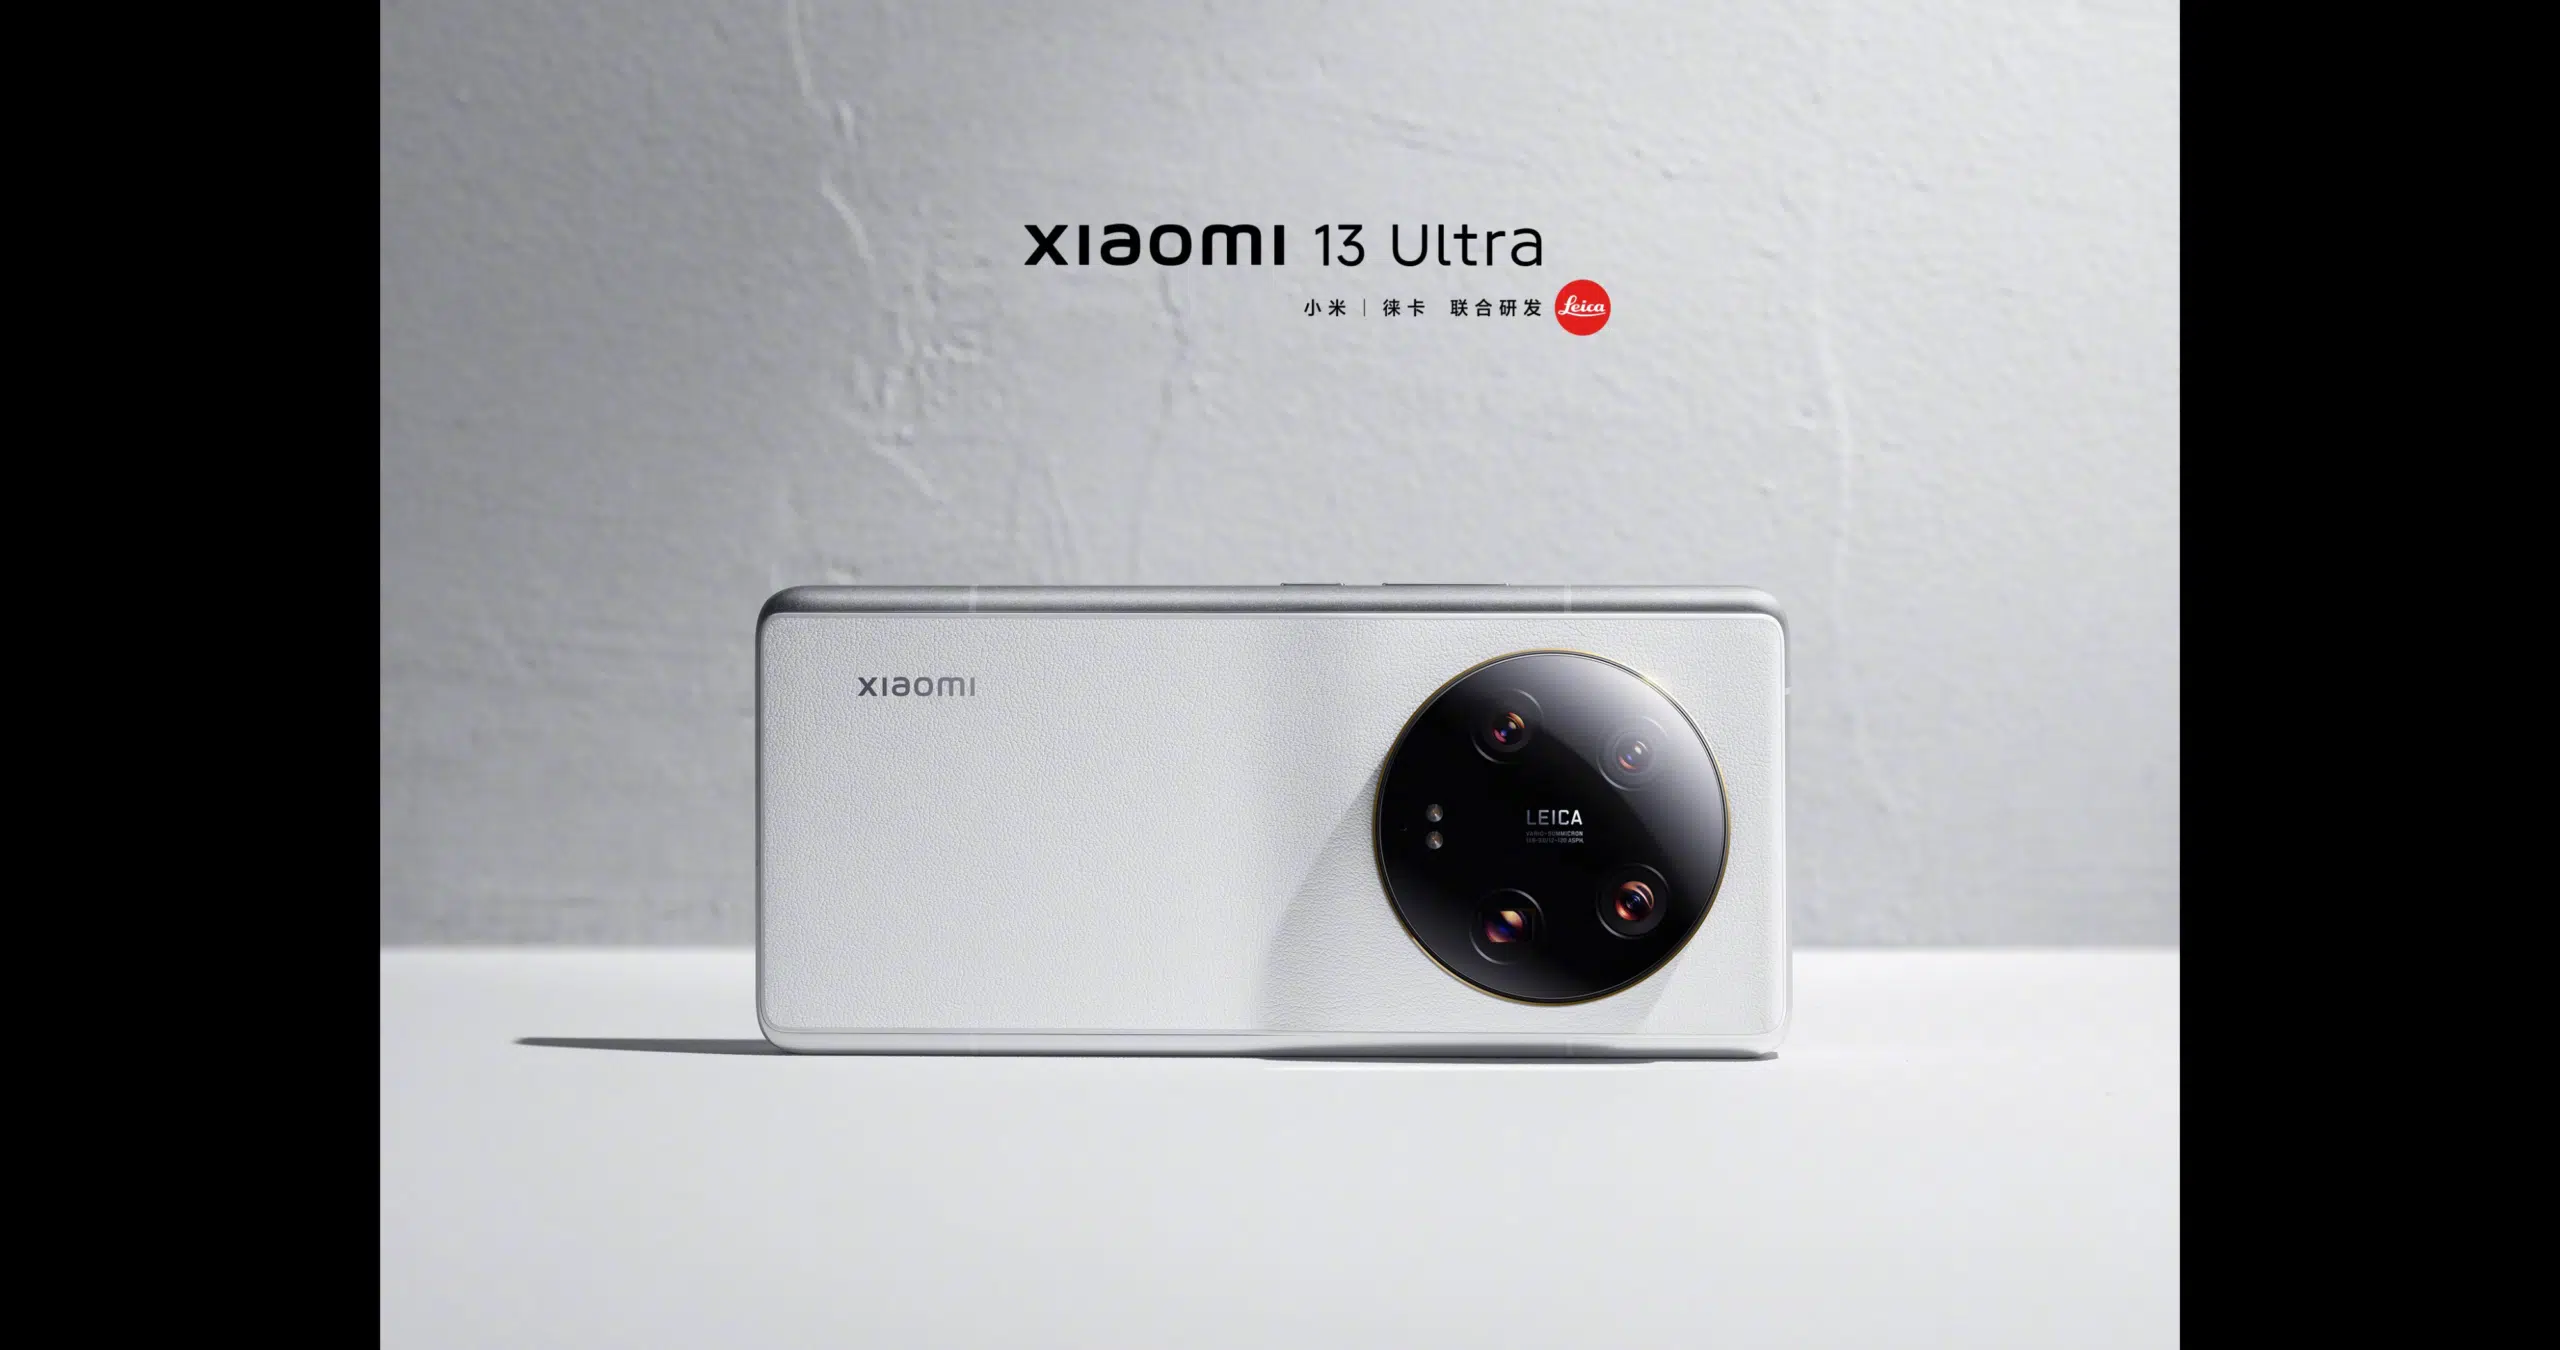 Xiaomi 13 Ultra is launching Globally on April 18th